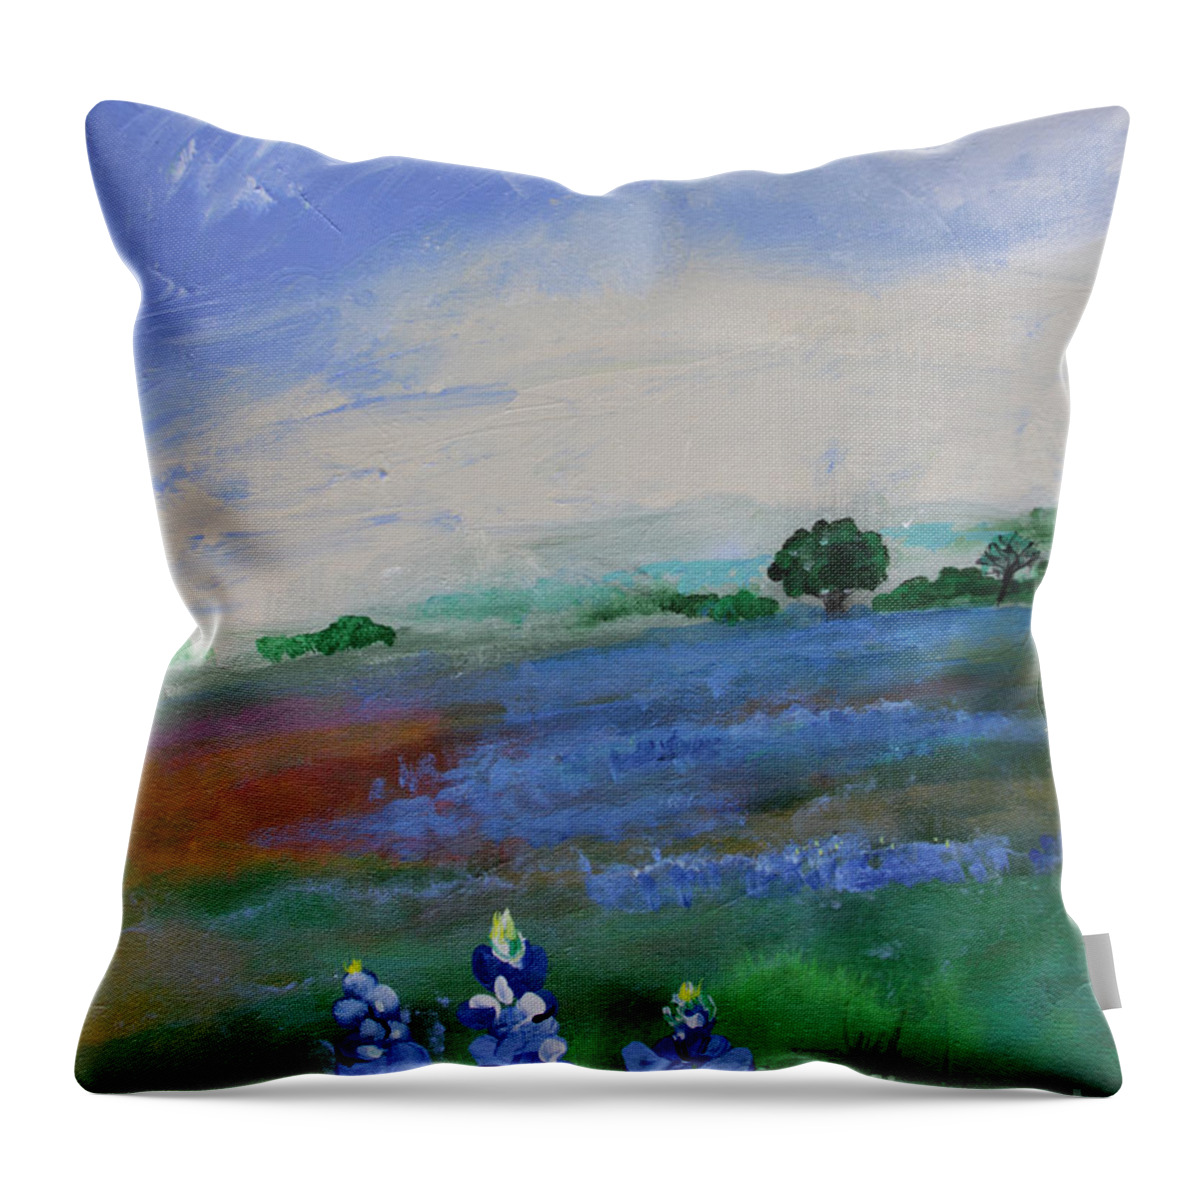 Texas Throw Pillow featuring the painting Texas Bluebonnets by Robin Pedrero